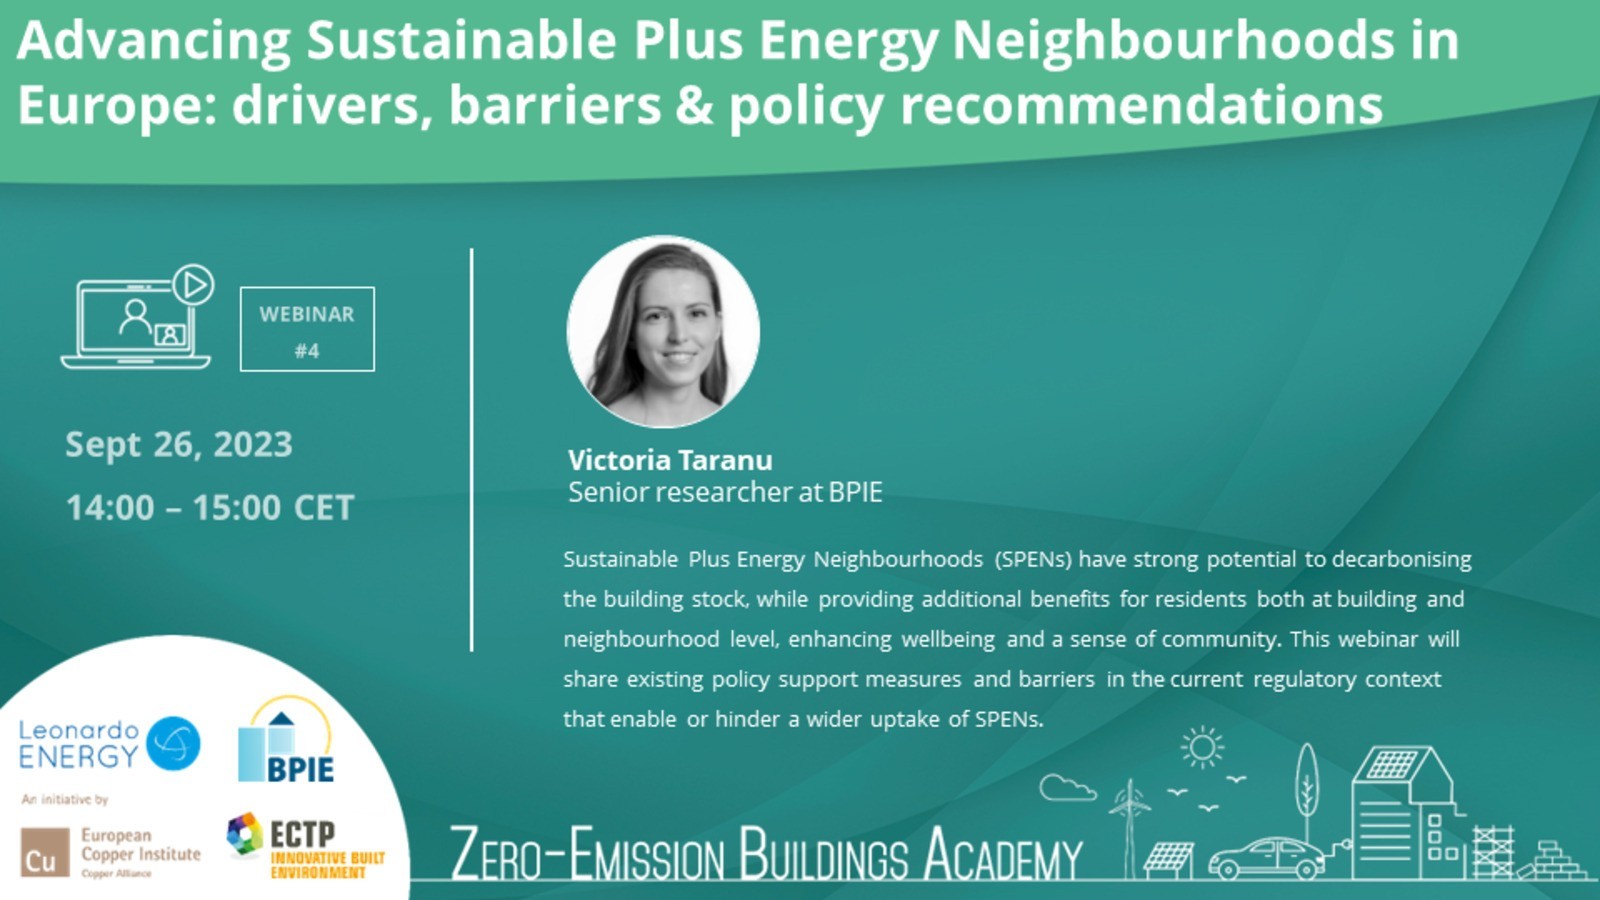 Advancing Sustainable Plus Energy Neighbourhoods in Europe: Drivers, barriers & policy recommendations